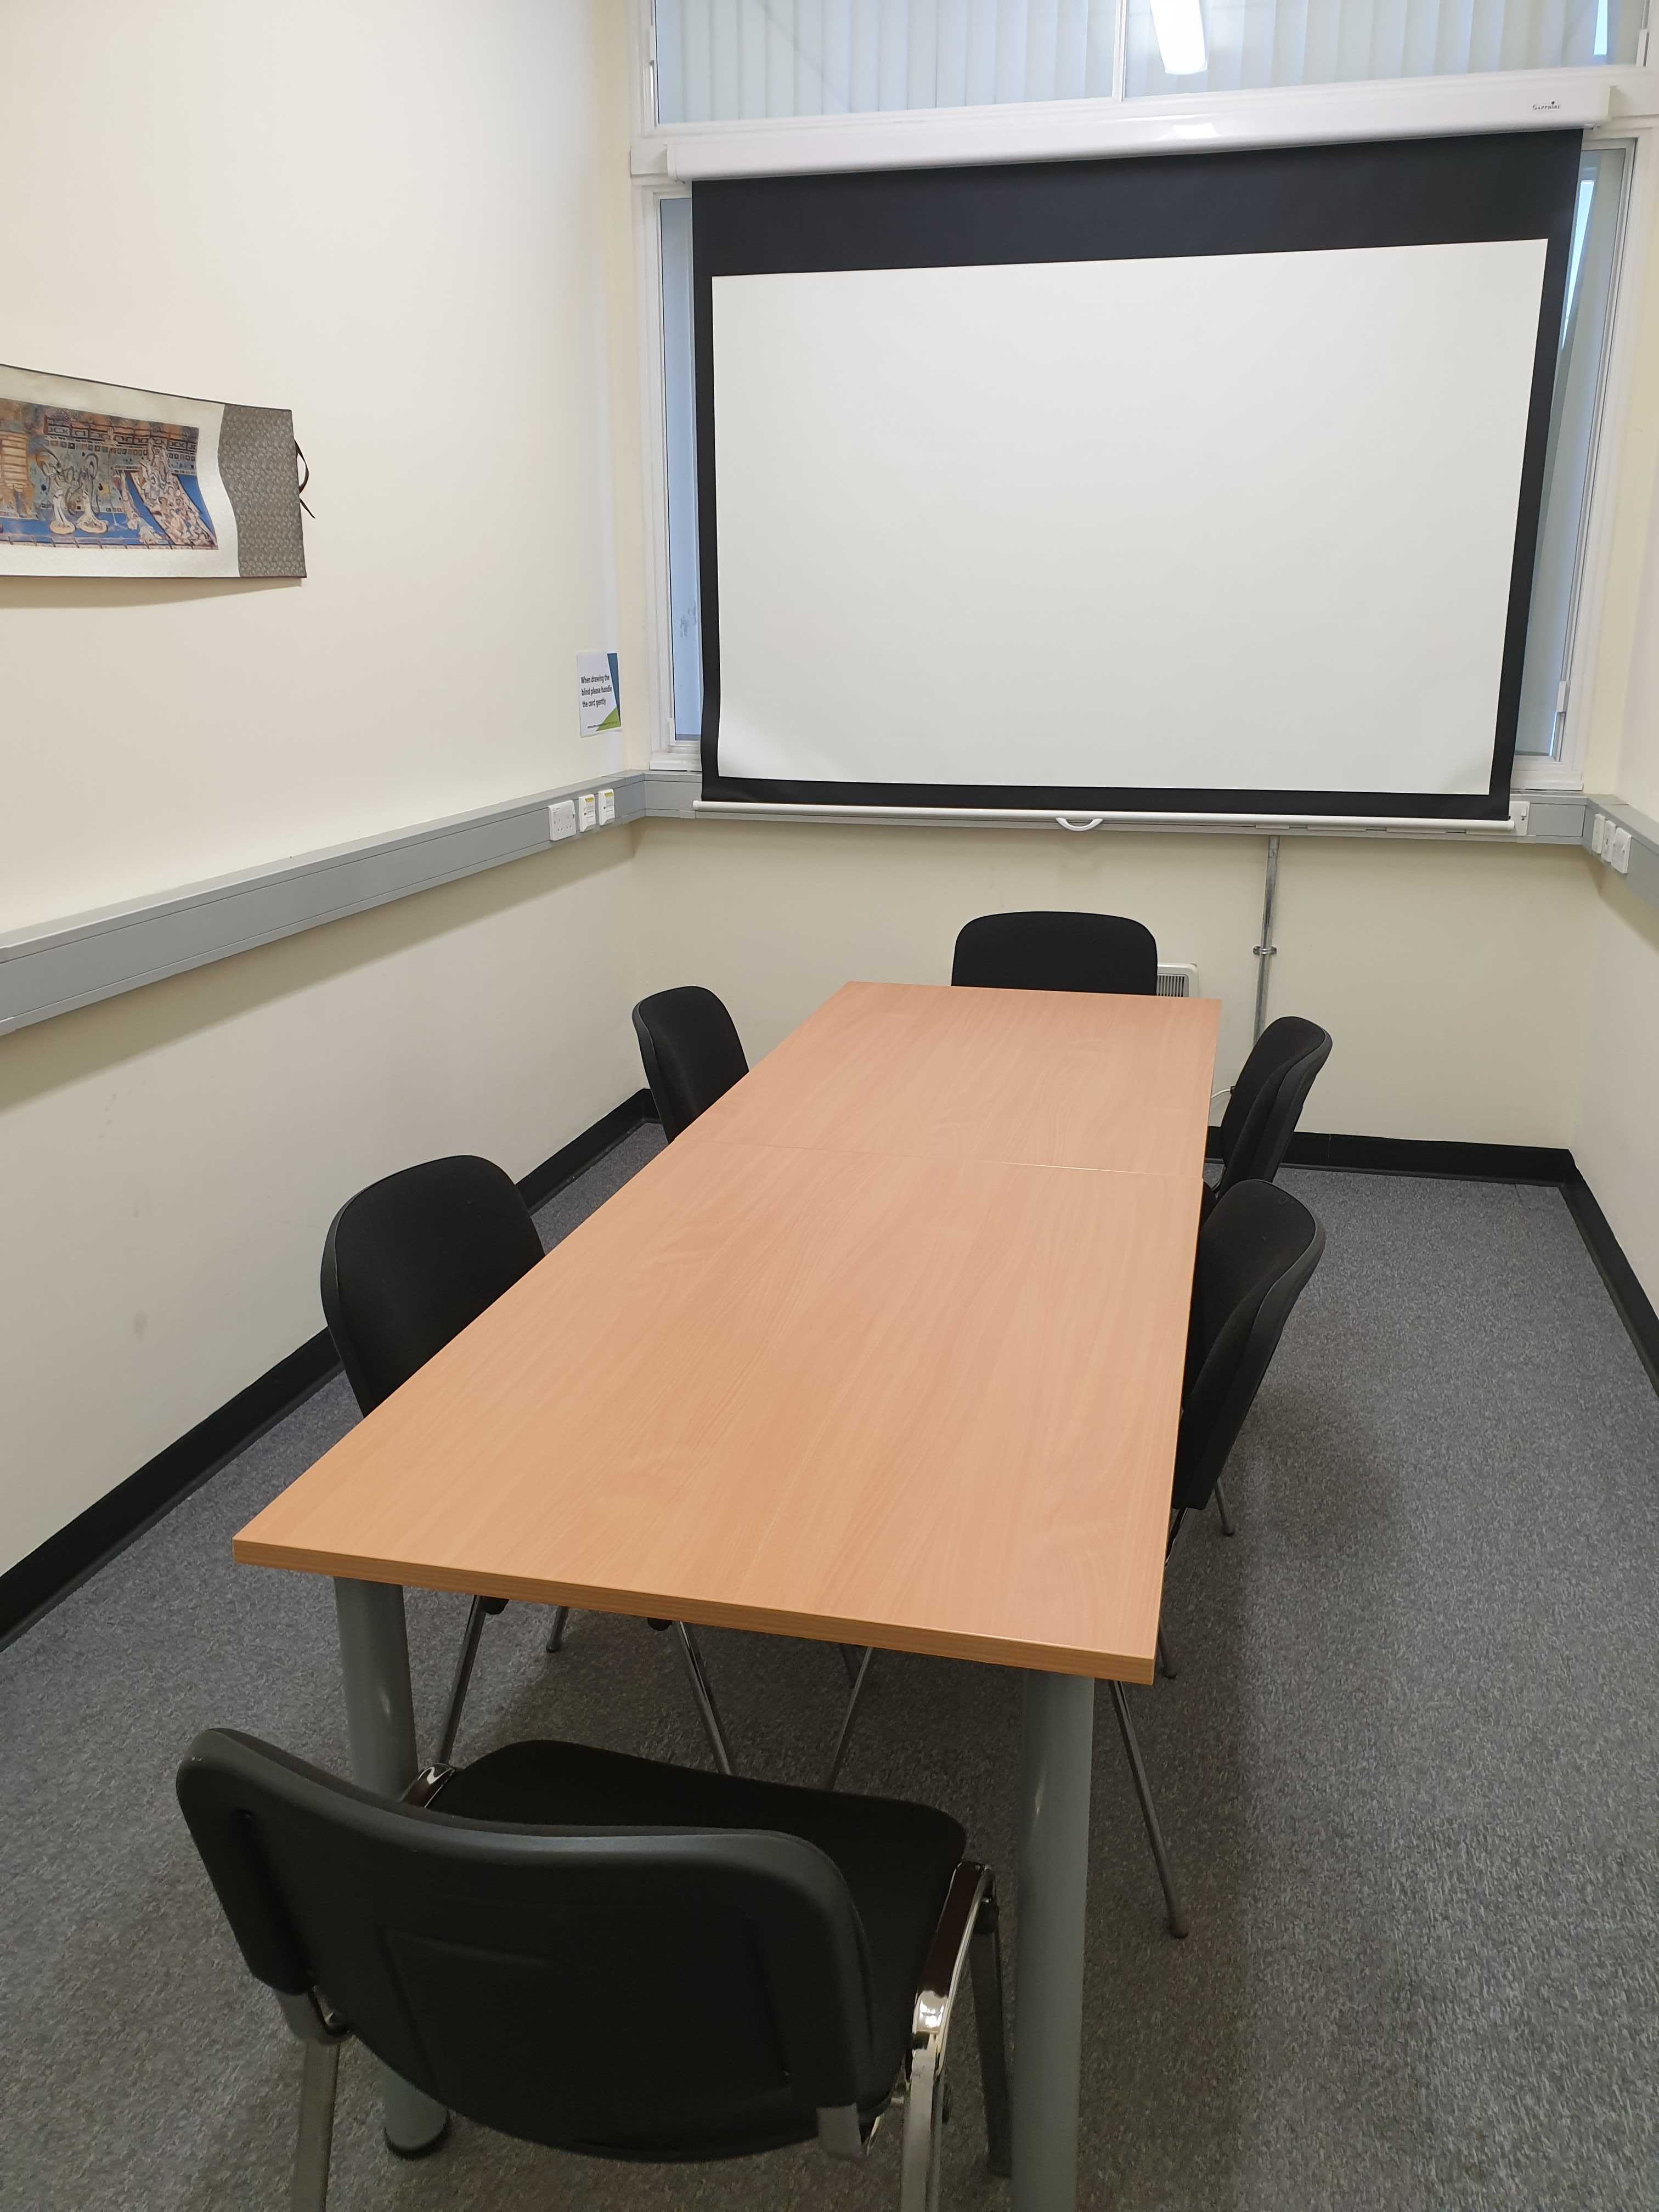 Photograph showing the standard layout of the Biomedical Campus Committee Room - a room with six chairs around a large boardroom table, with a projector screen on the end wall.